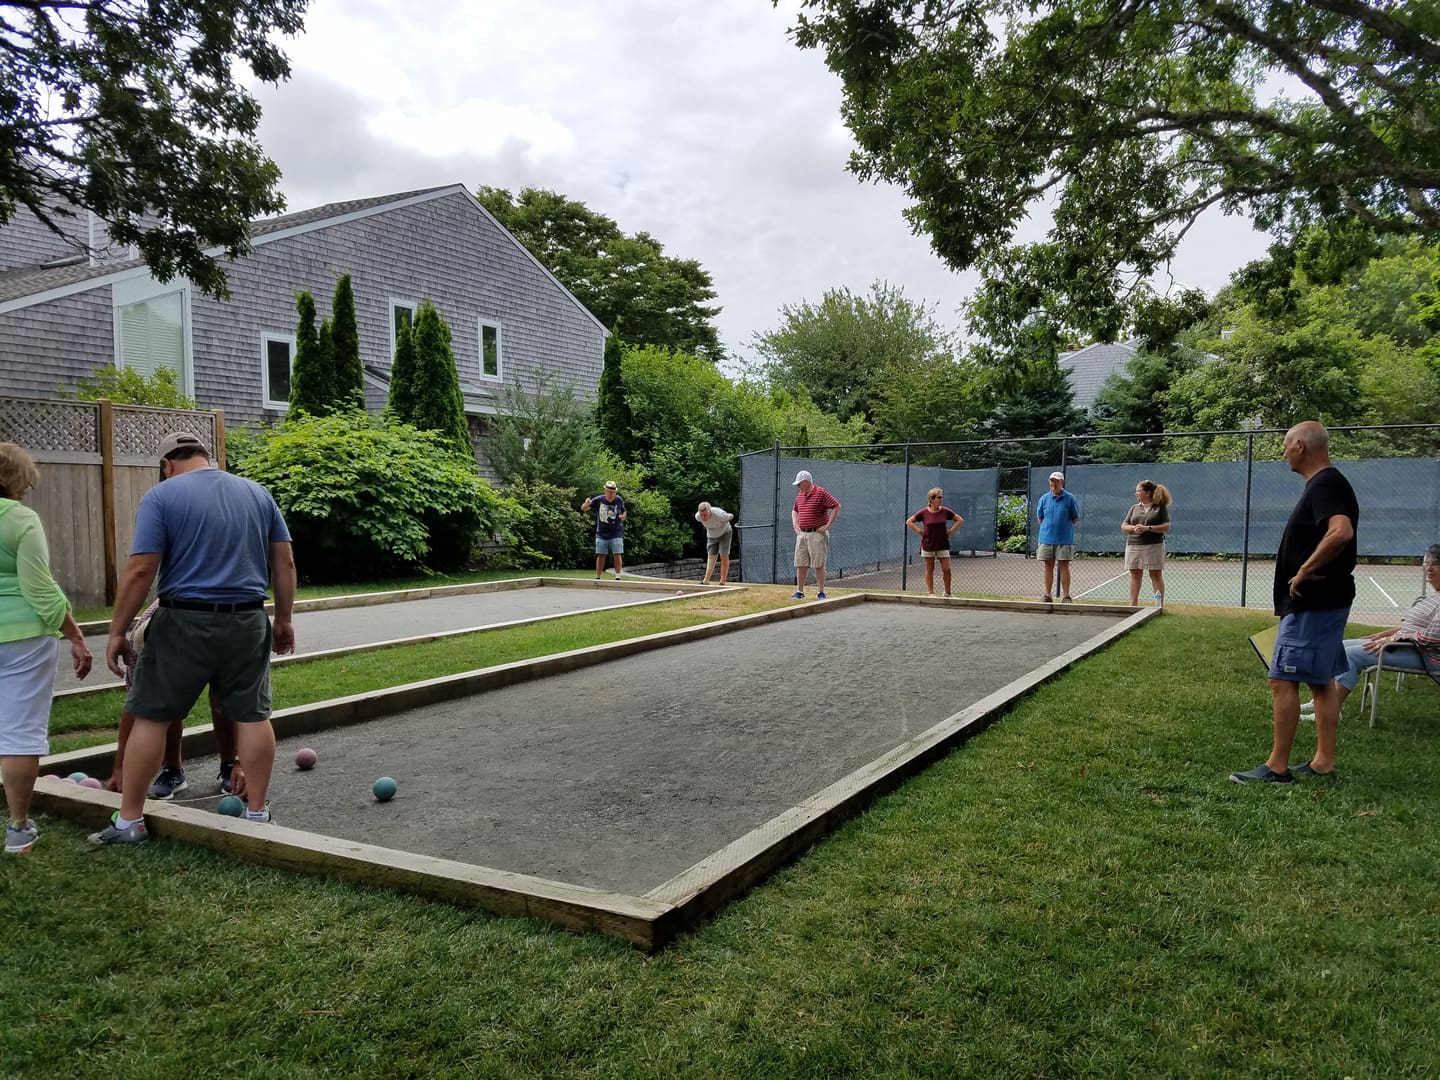 A group of people playing bocce ball in the yard.